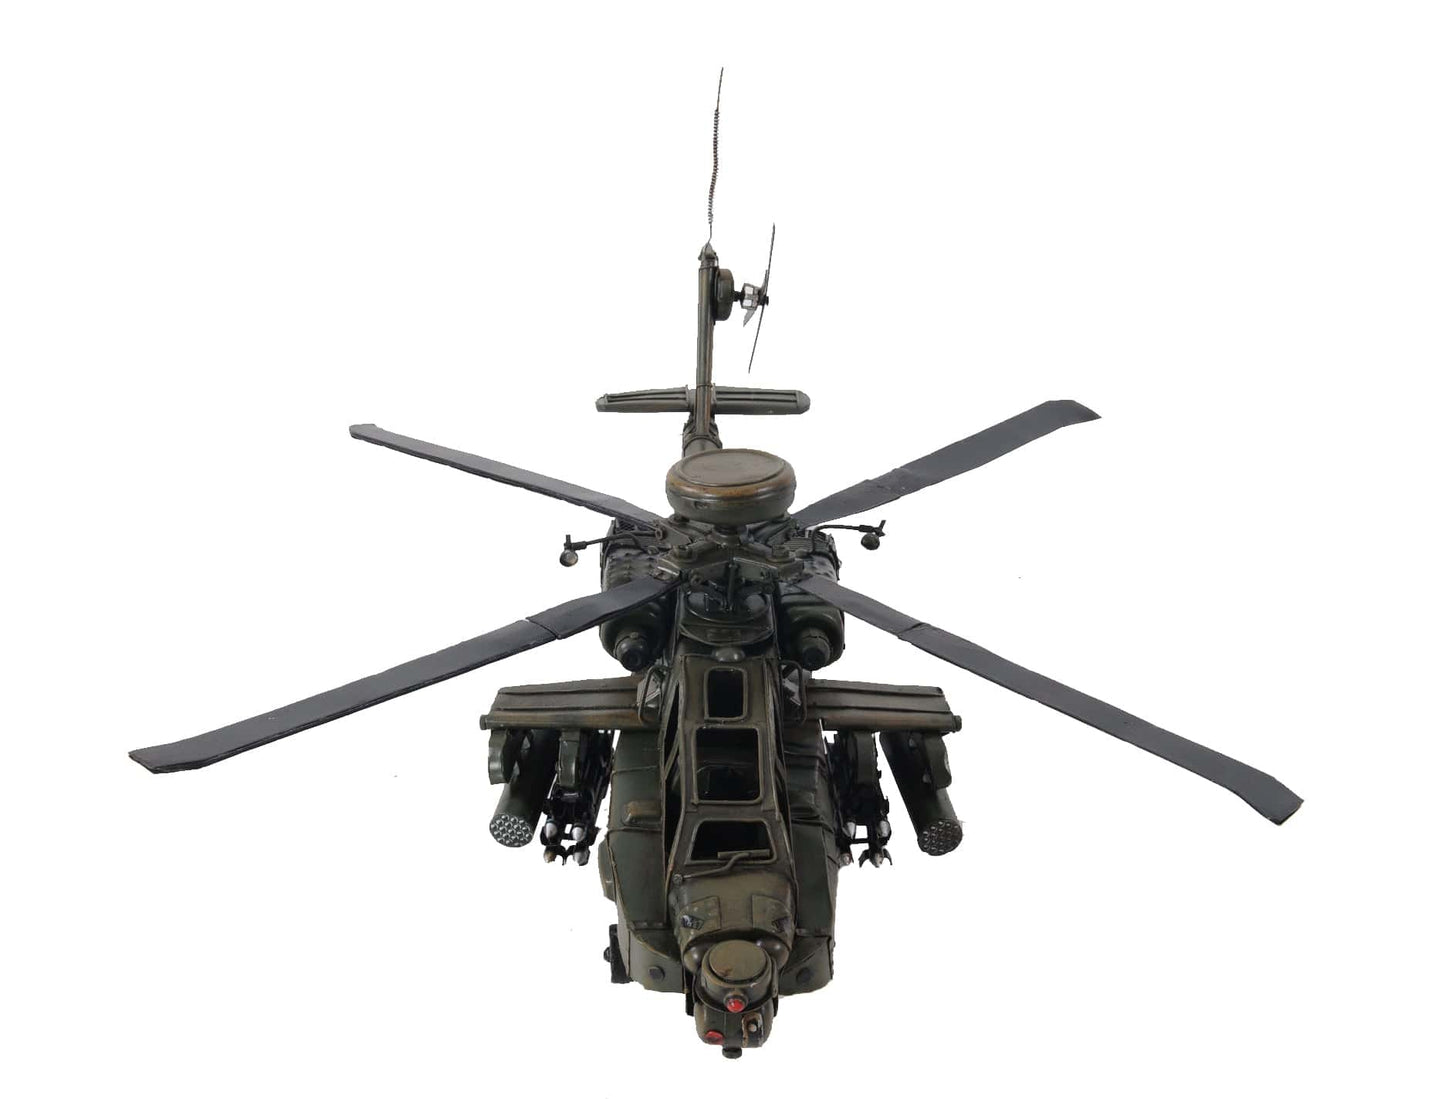 ALDO Creative Arts Collectibles Scale Model L: 18 W: 17 H: 9 Inches / NEW / Iron Boeing AH-64 Apache US Army’s Primary Attack helicopter Deck Top Metal Model